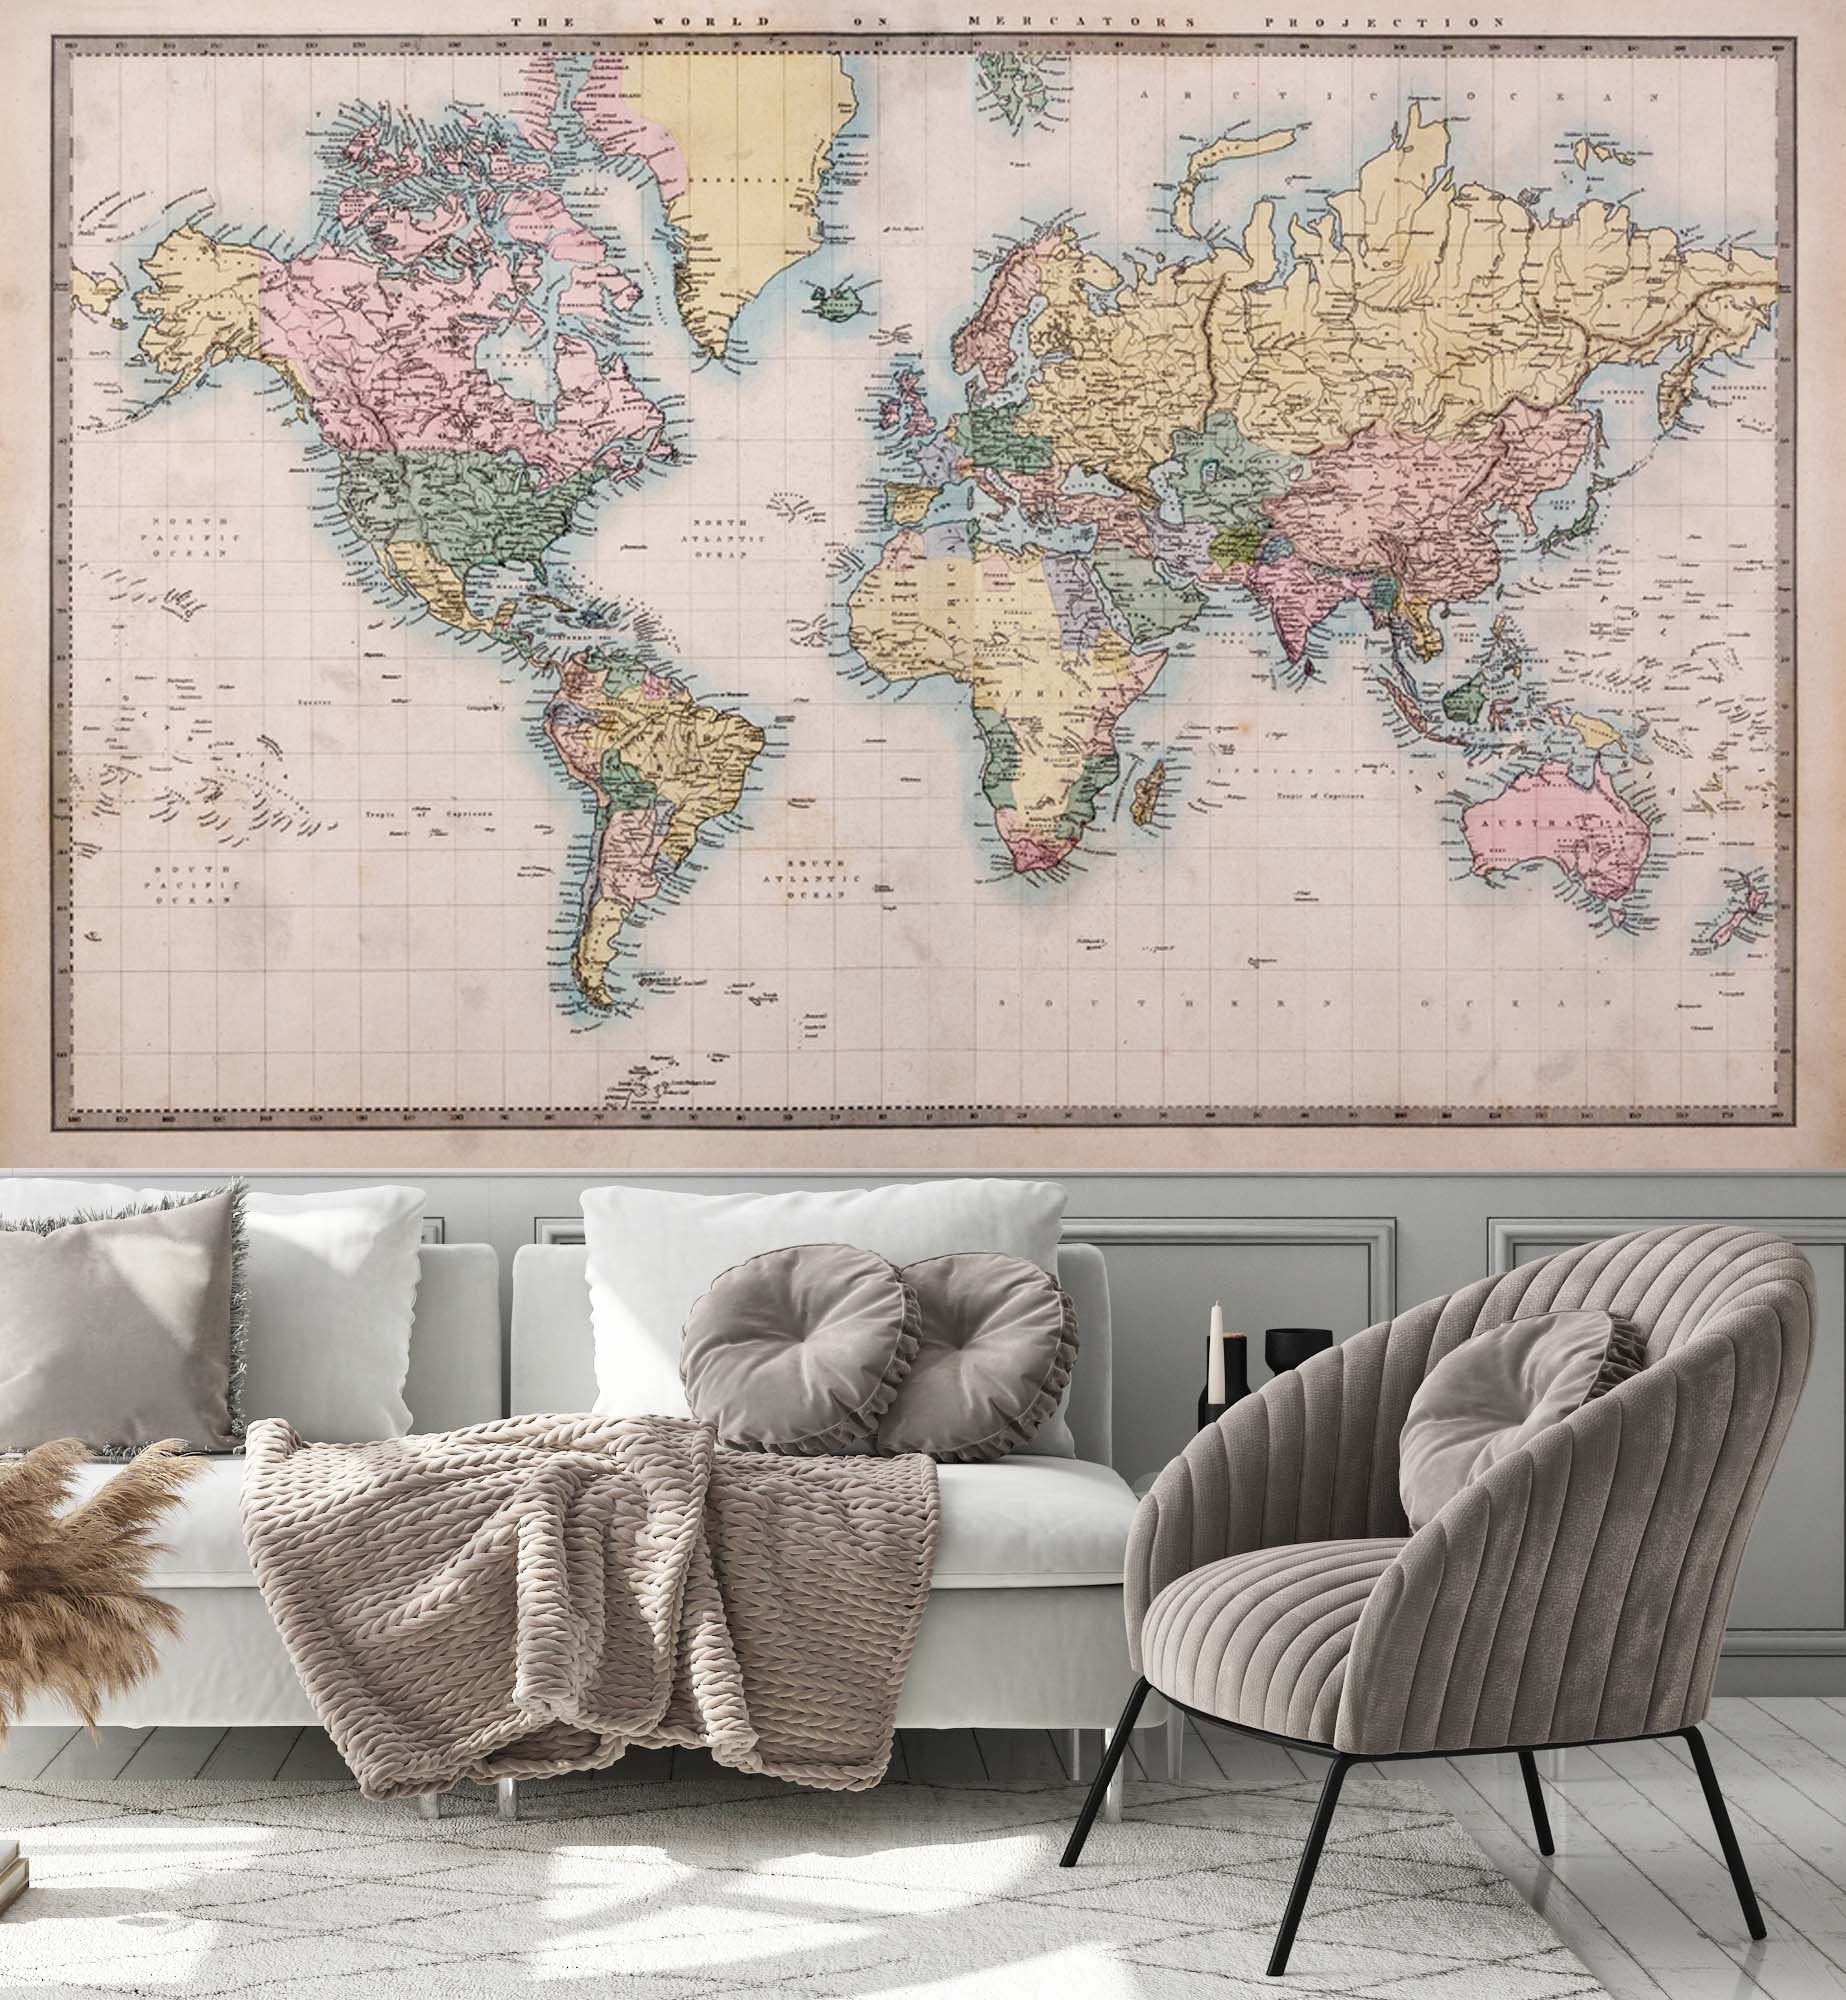 Colorful Old World Map Wallpaper Restaurant Cafe Office Bedroom Living Room Mural Home Decor Wall Art